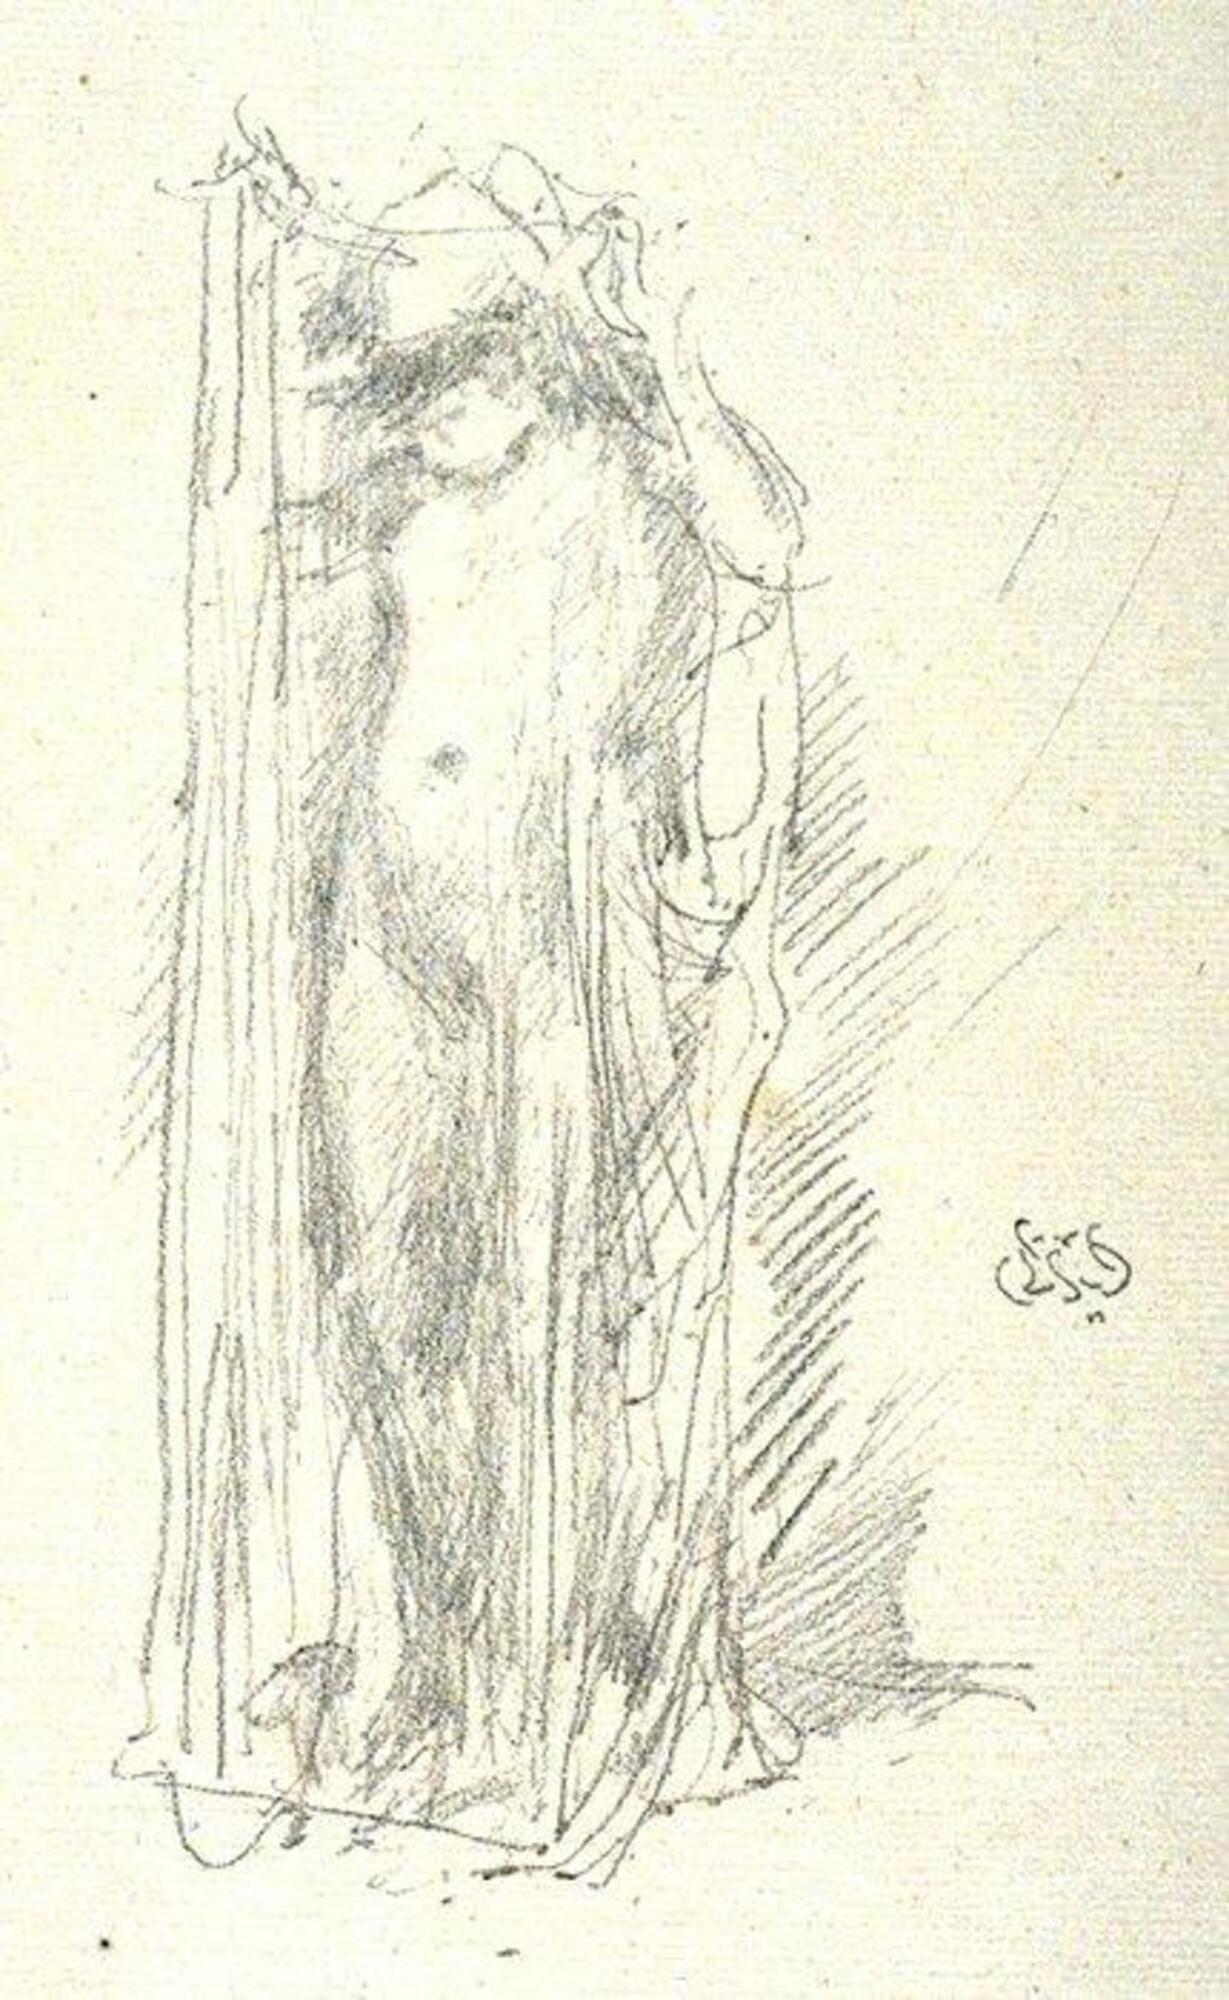 A nude female stands facing towards the left. Her head os bowed down and has a scarf around her hair. Her arms are raised over her head as she holds a diaphanous drapery in front of her figure.